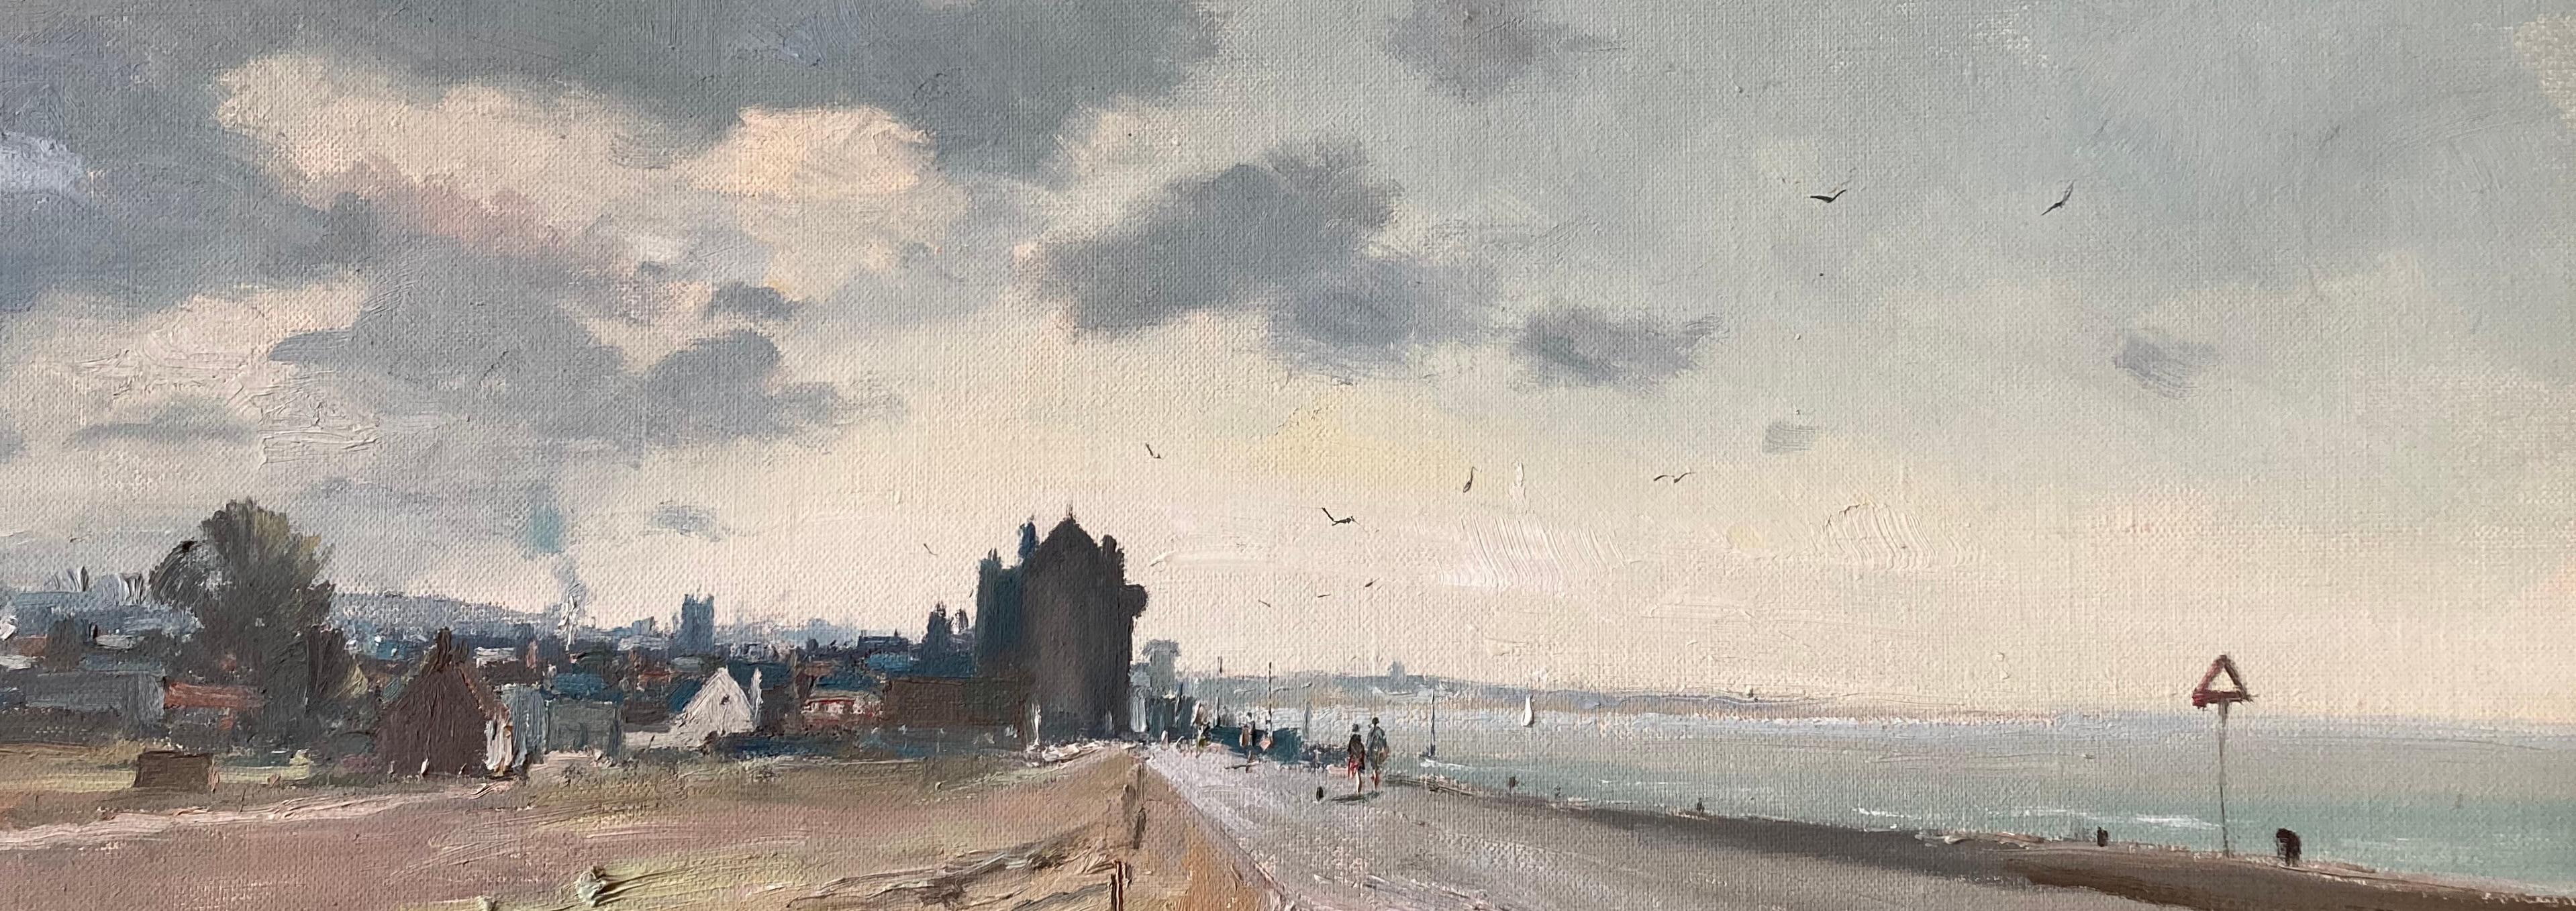 Marcus Ford, Aldeburgh beach,  Impressionist scene - Gray Landscape Painting by marcus ford